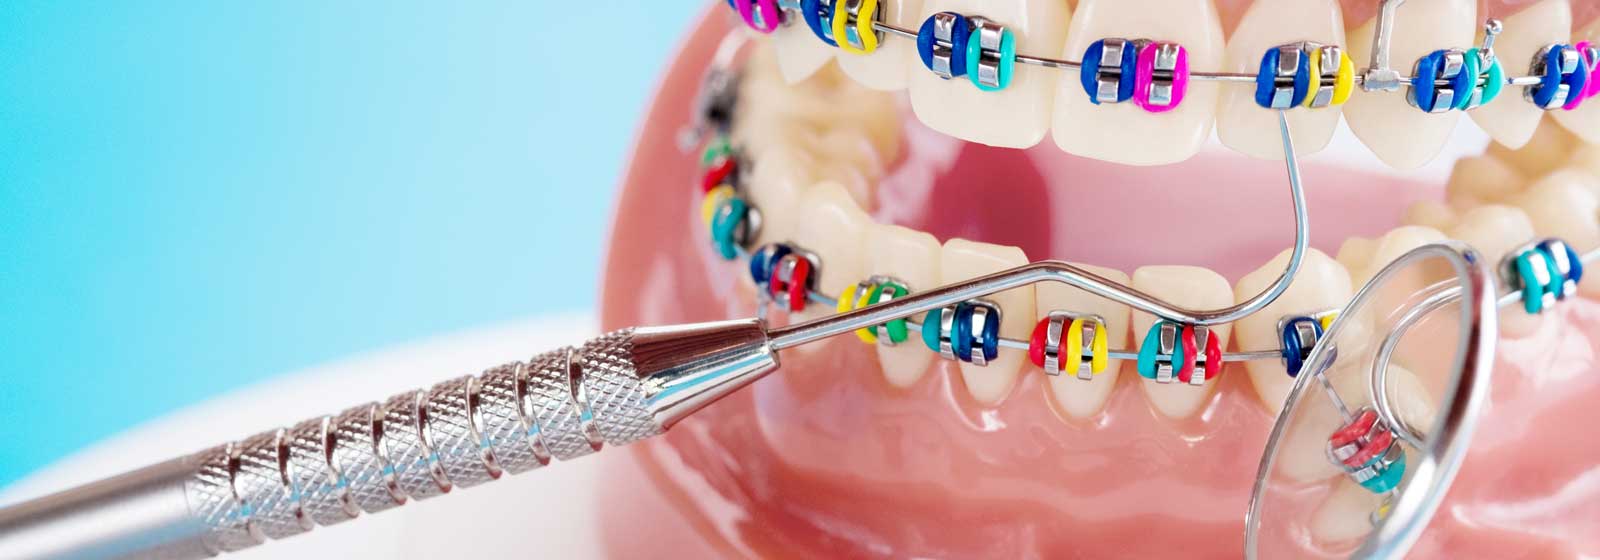 Types of Braces - Colorful braces with mirror and pick